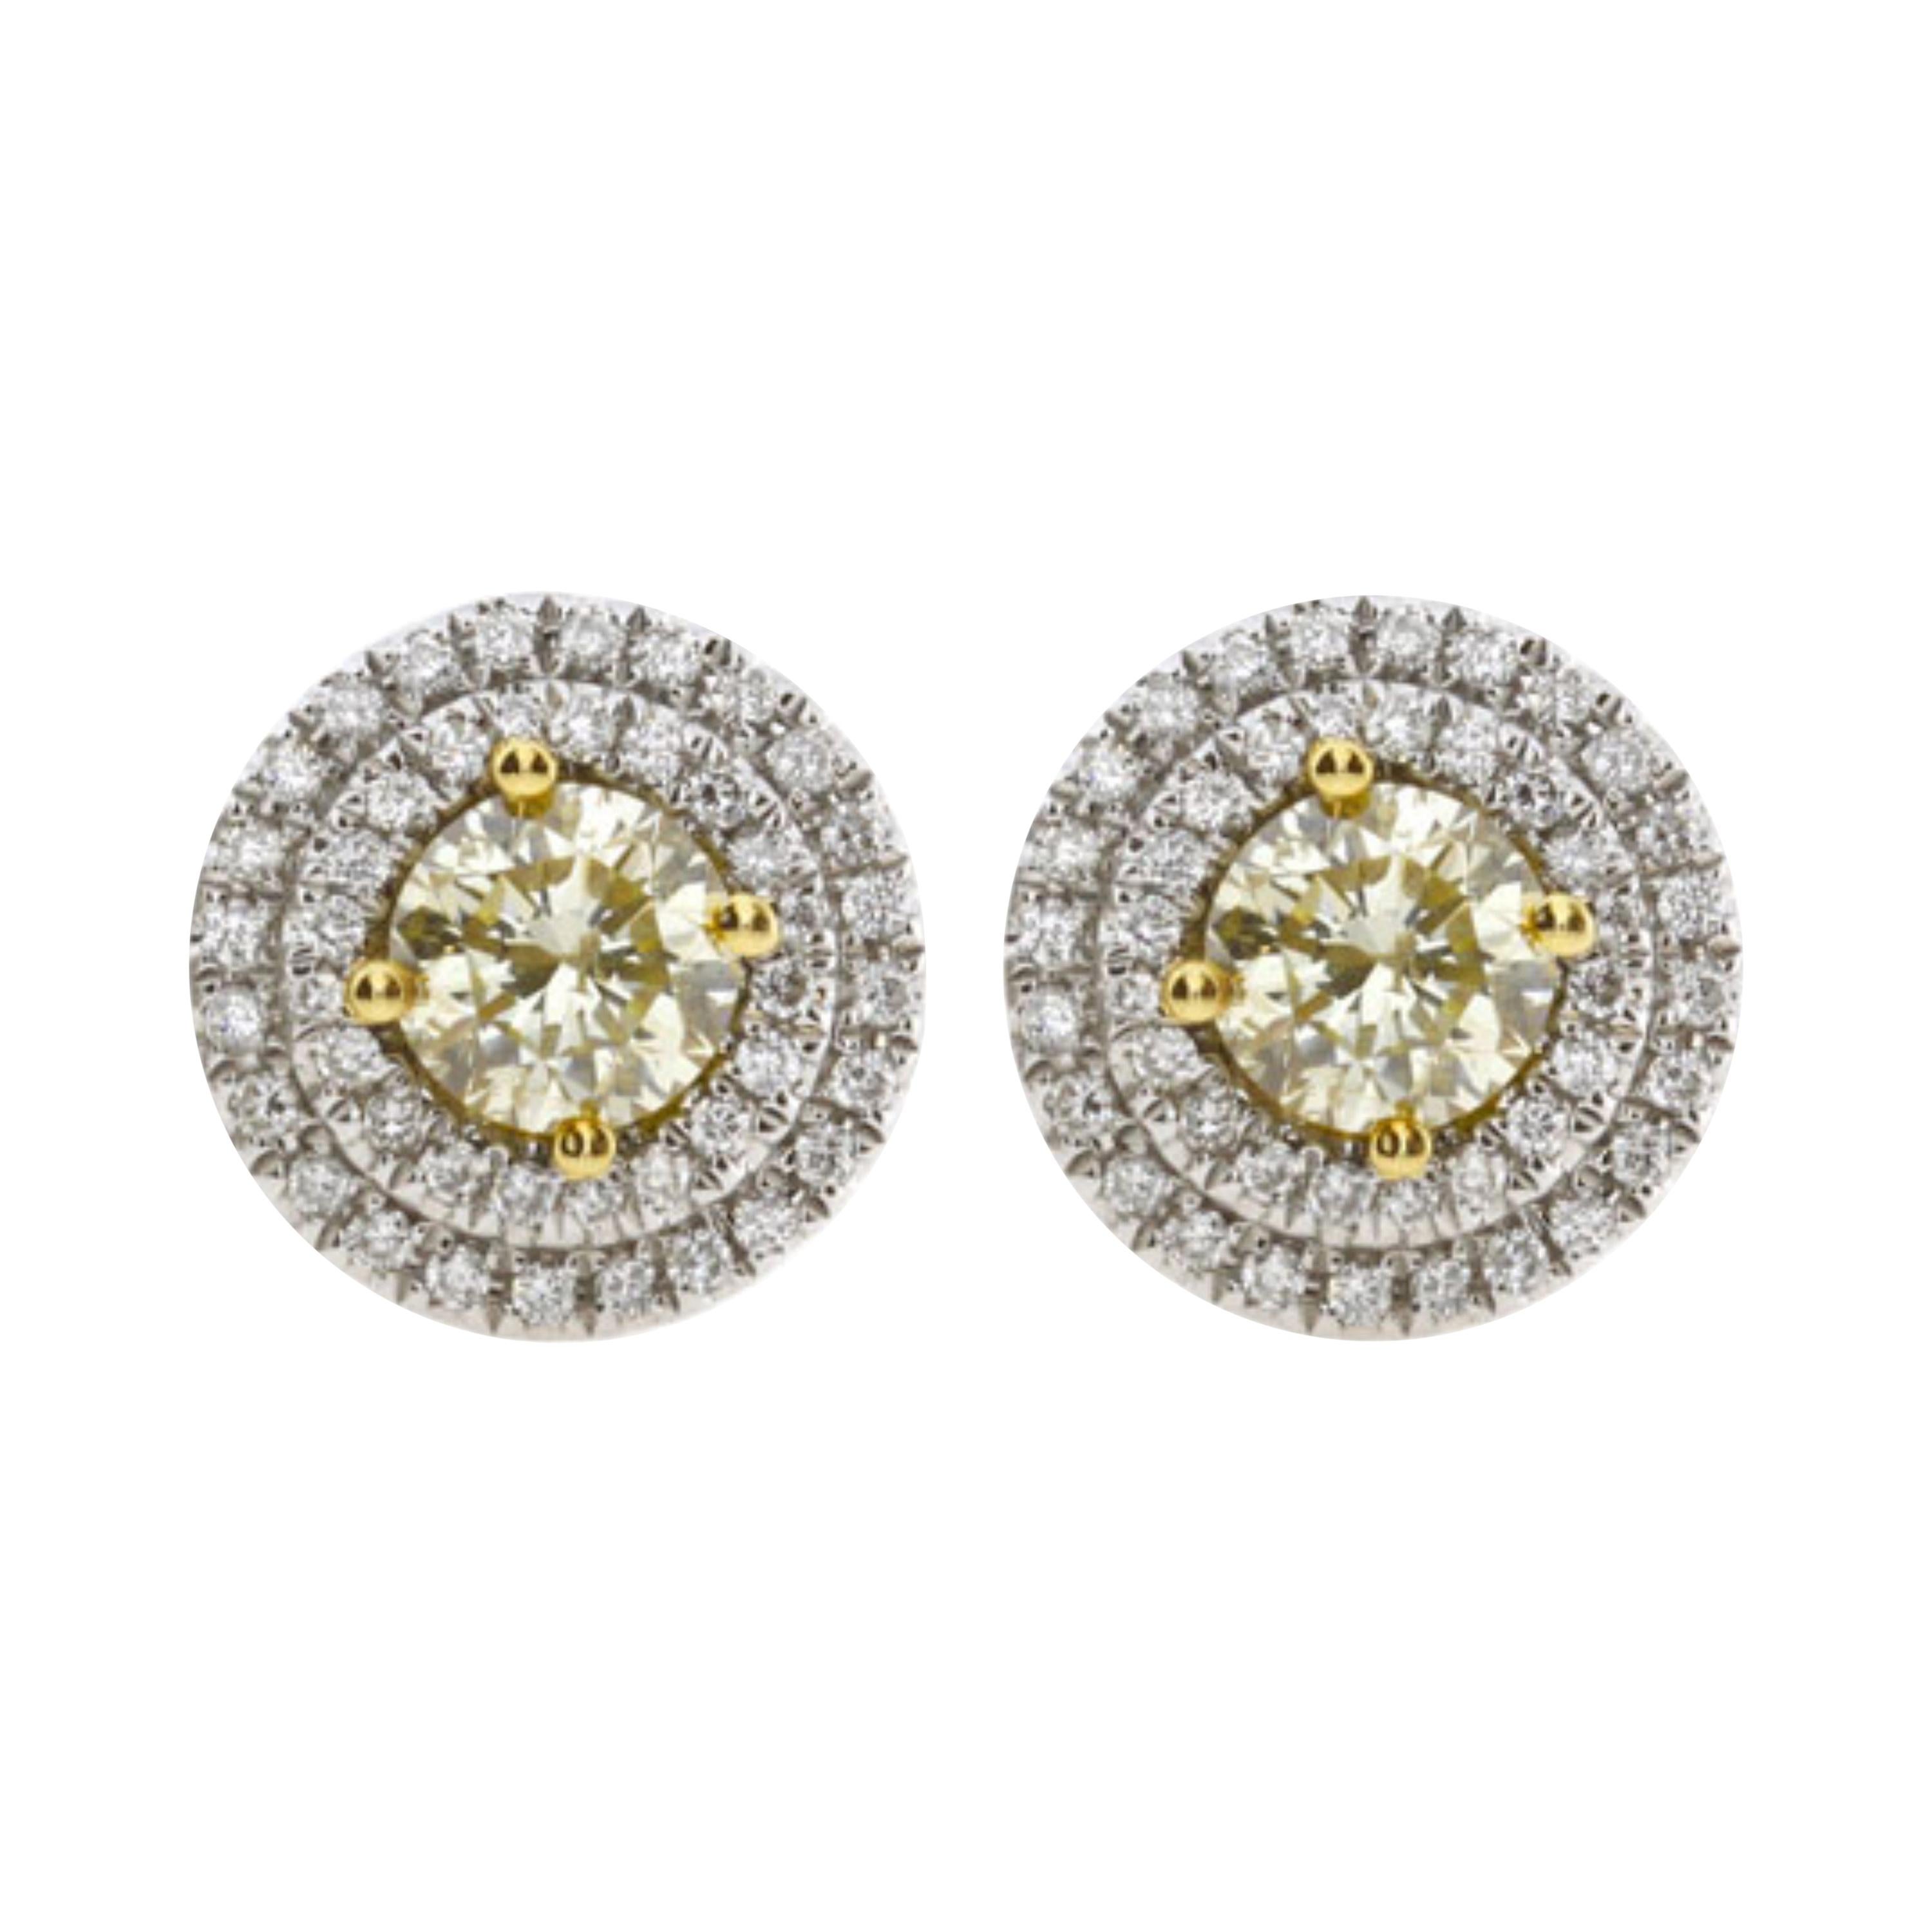 1.02 Carat Natural Fancy Yellow Diamond Stud Earrings with Double Halo For Sale